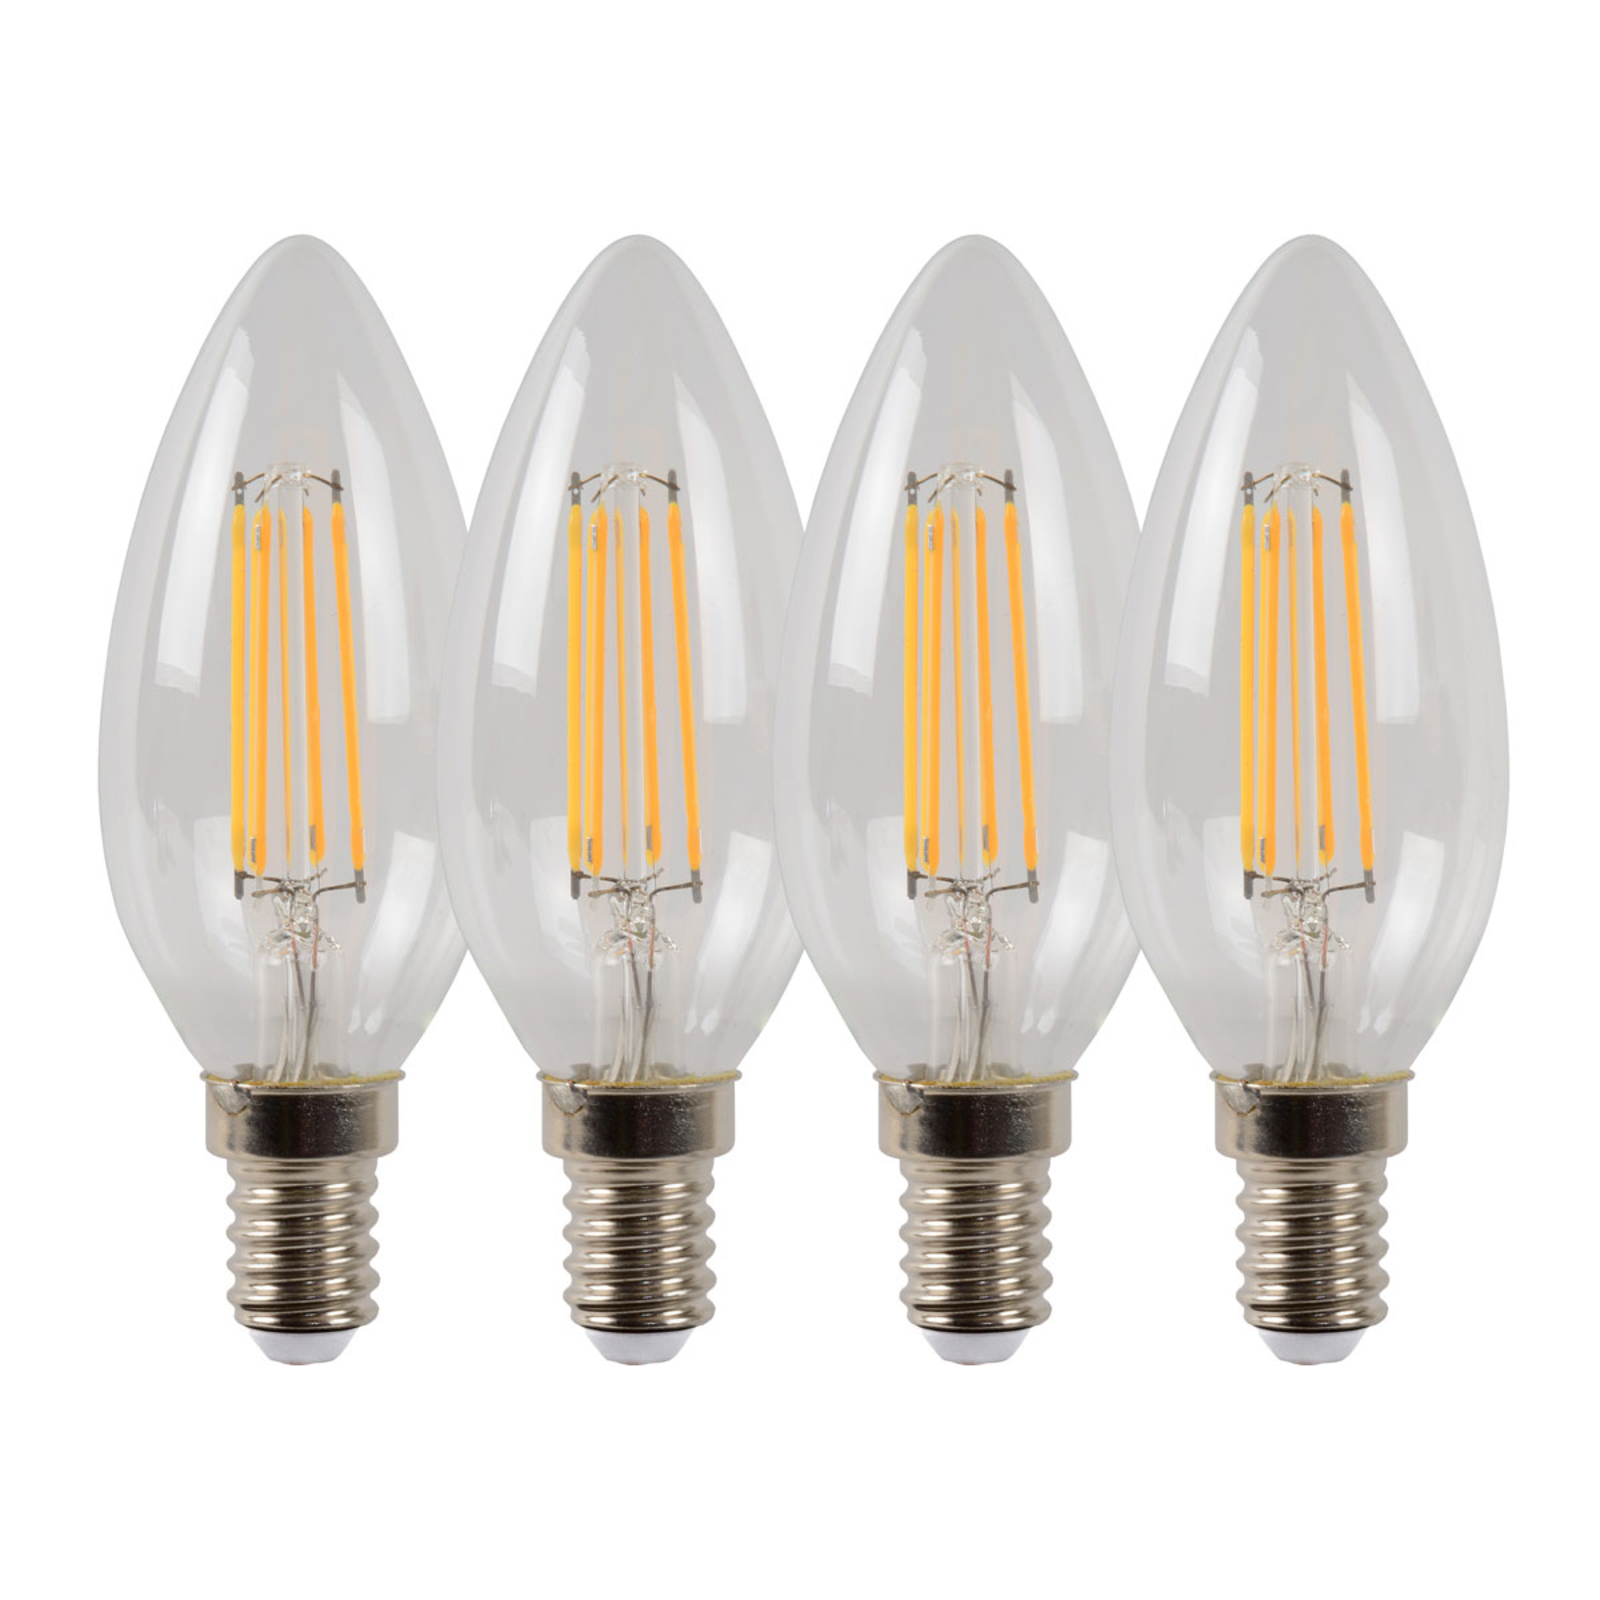 Candle LED bulb E14 4 W 2,700 K dimmable set of 4